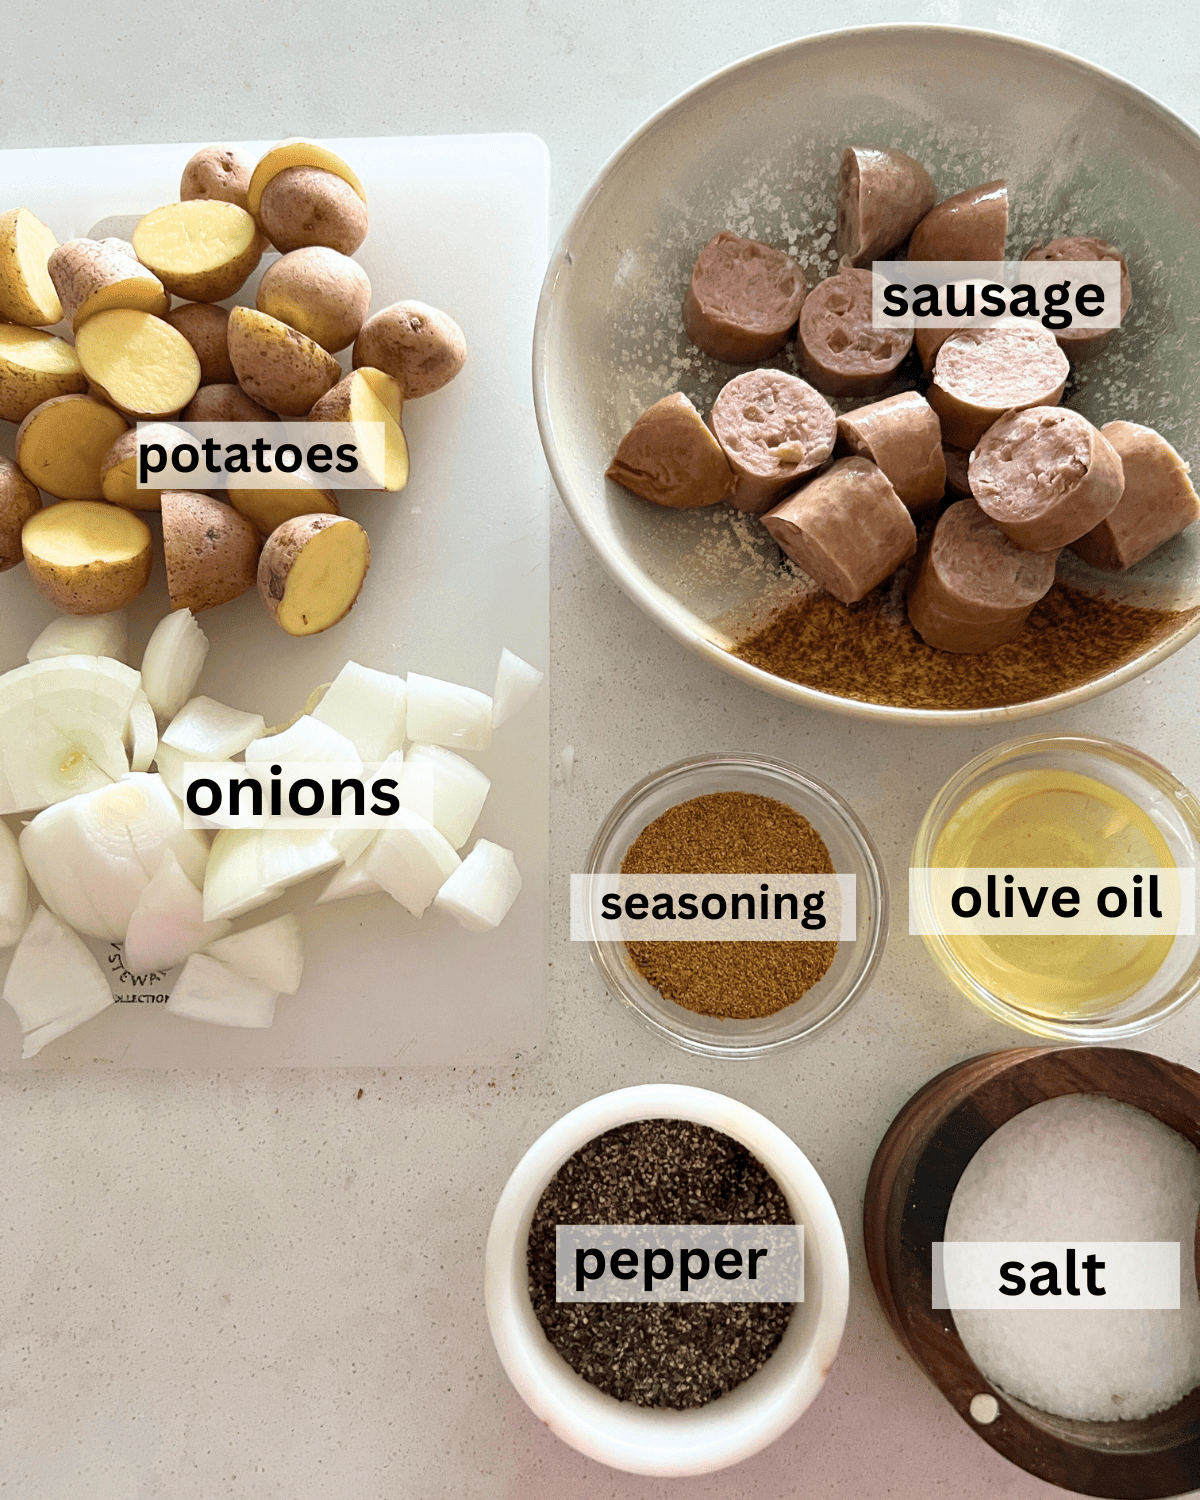 ingredients needed for smoked sausage and potatoes